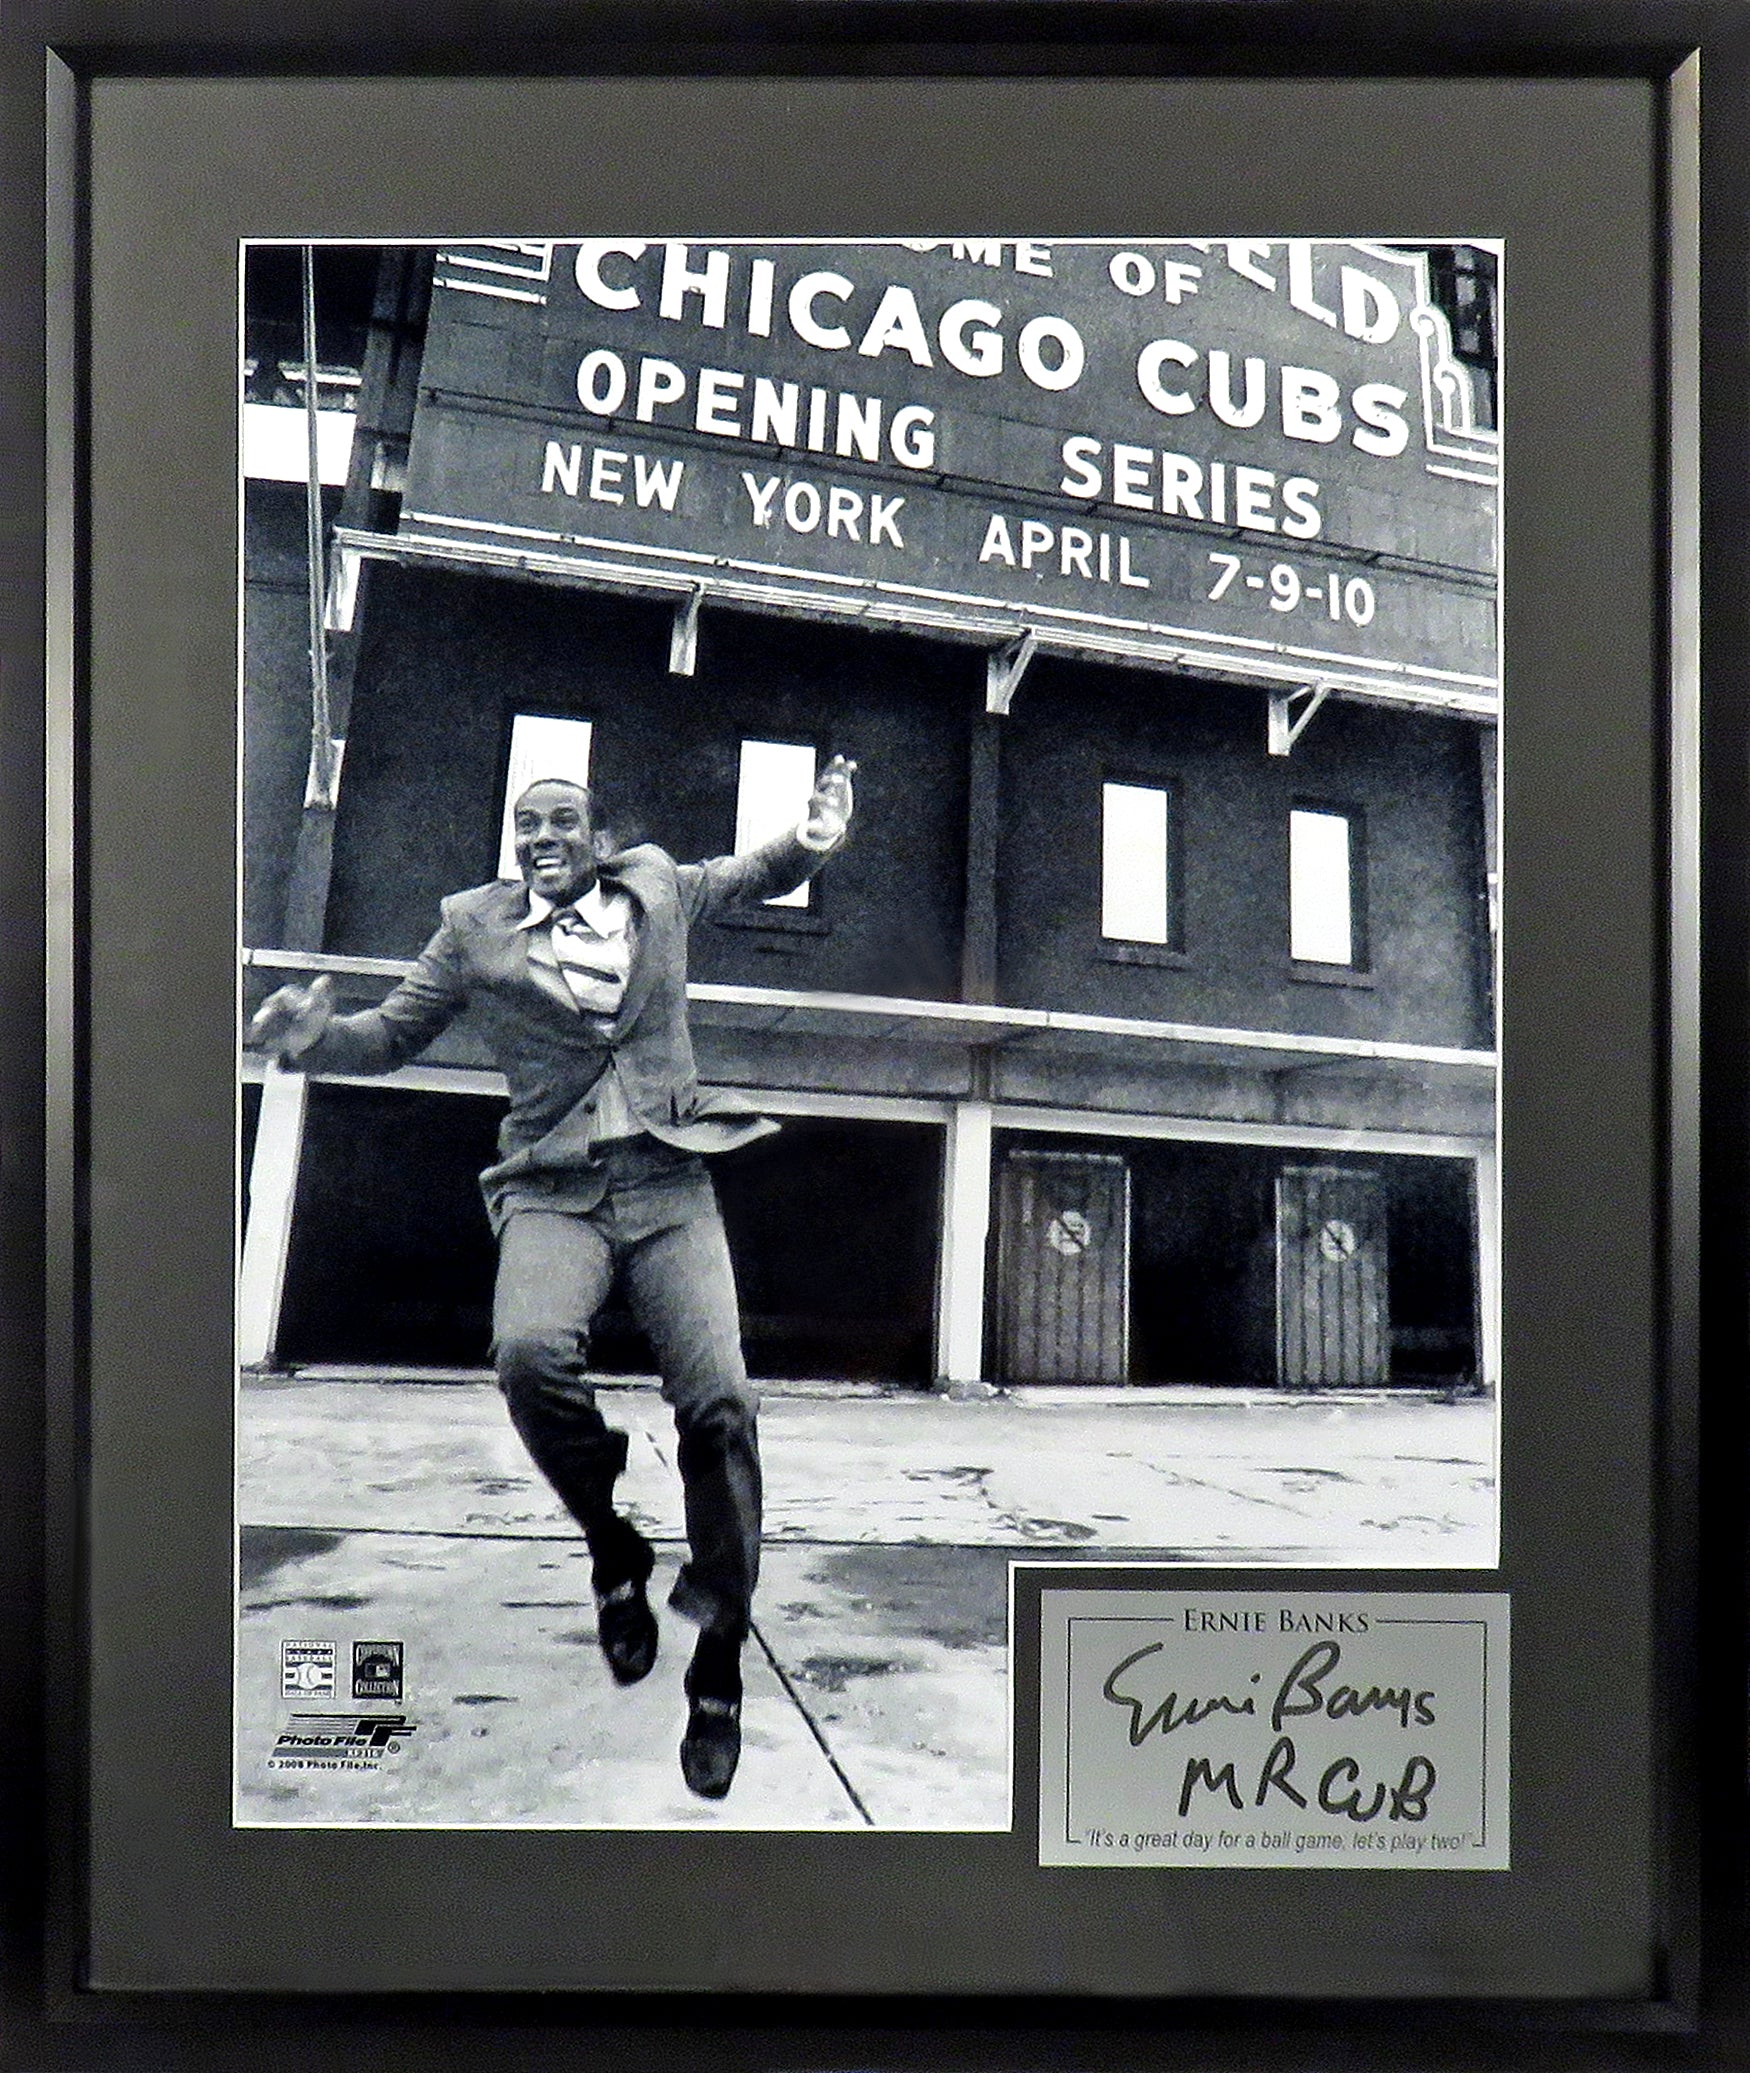 Chicago Cubs Ernie Banks “Let's Play Two!” Framed Photograph